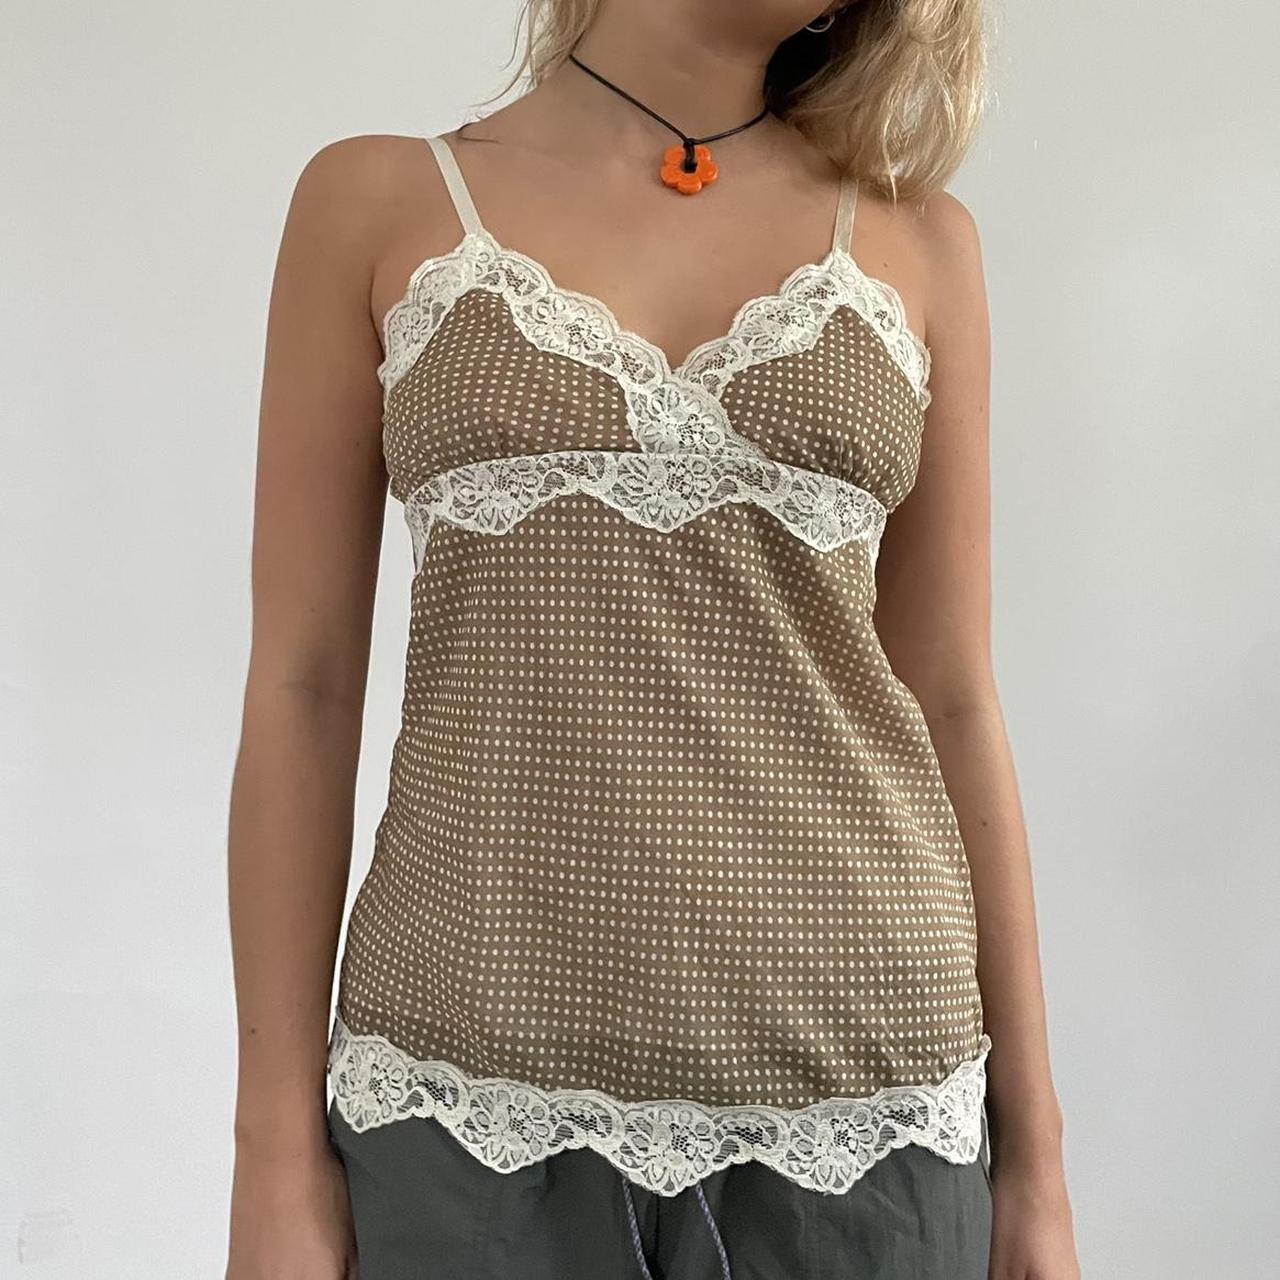 Brown lace trim cami. Brown and white polka dot with... - Depop